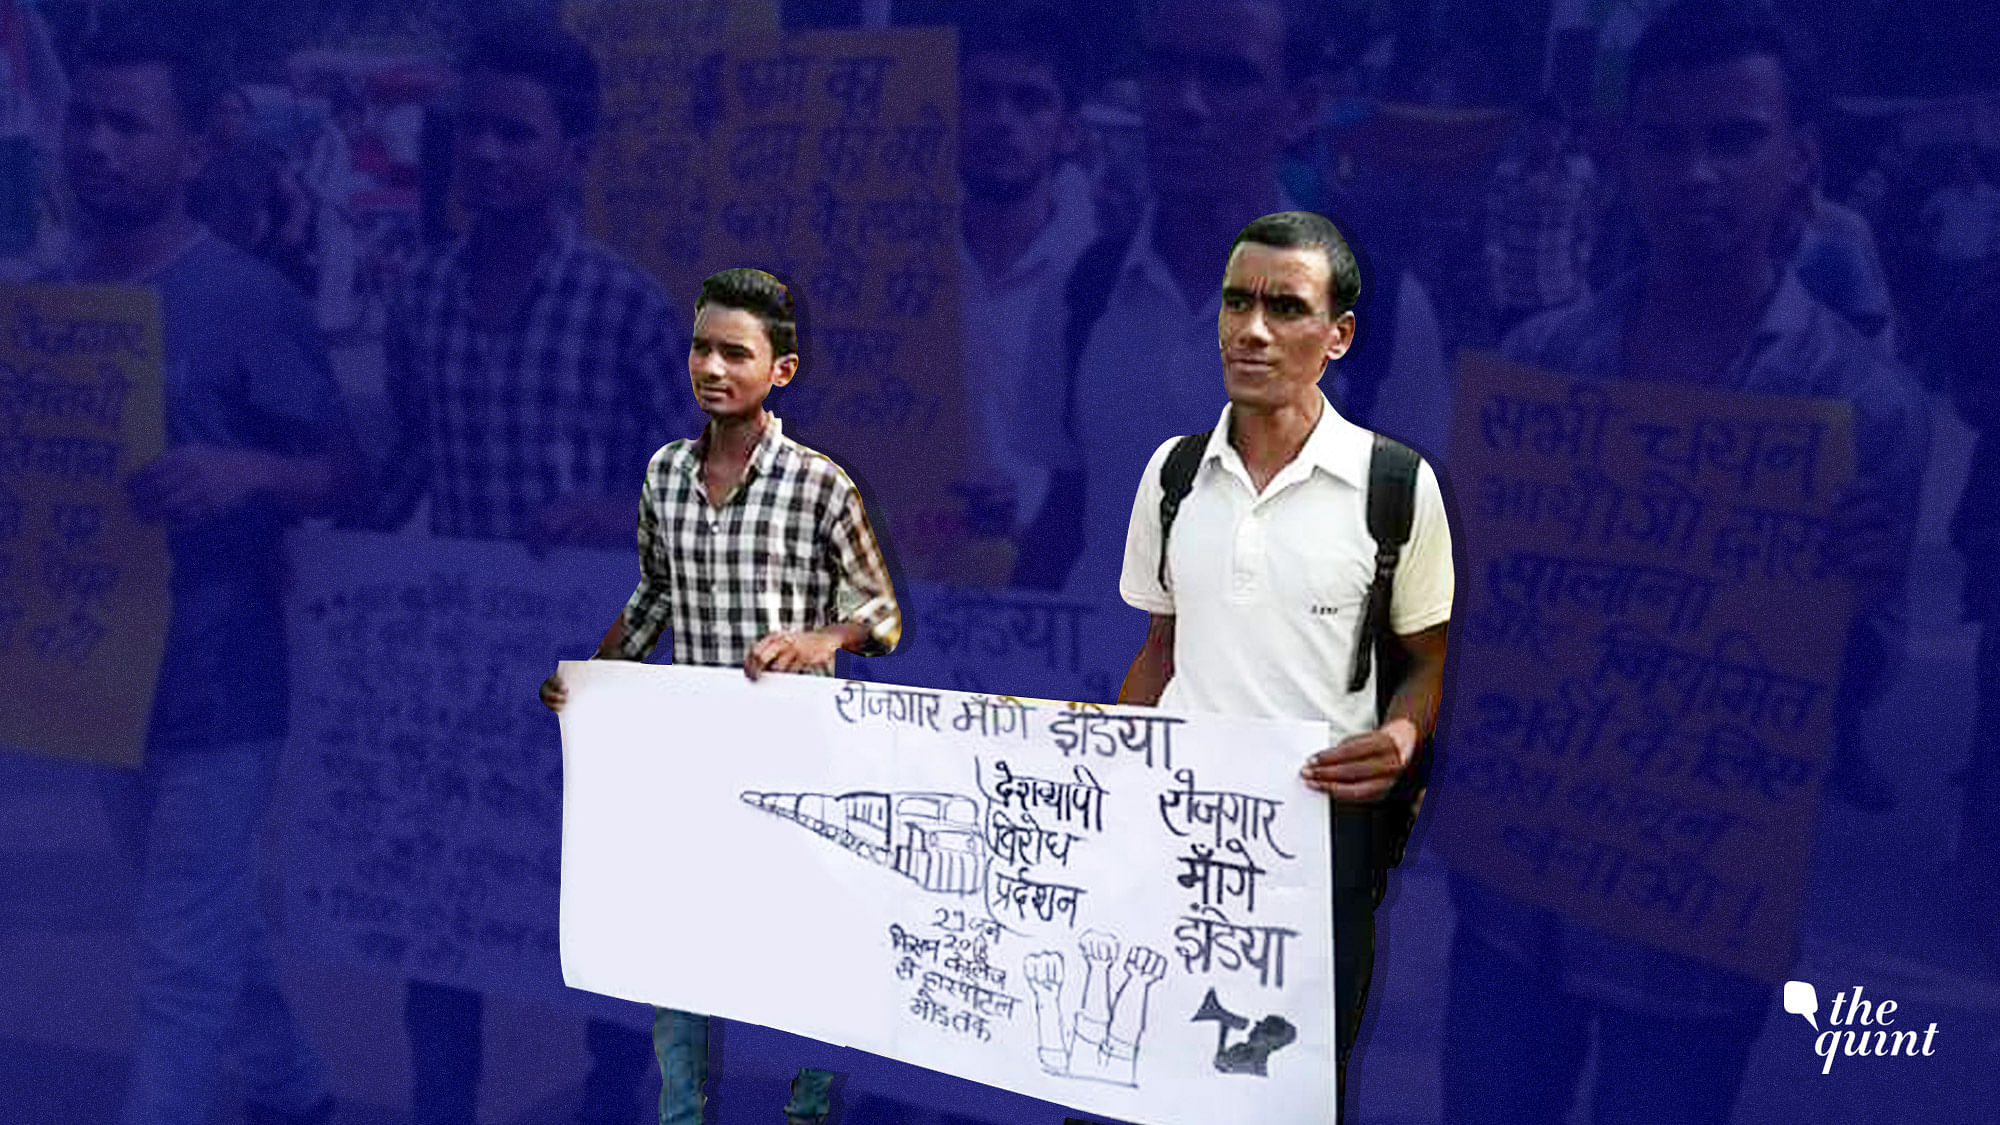 Protests by AISA-backed group, ‘Rozgar Mange India’ against delay in exam date by the Railway Recruitment Board.